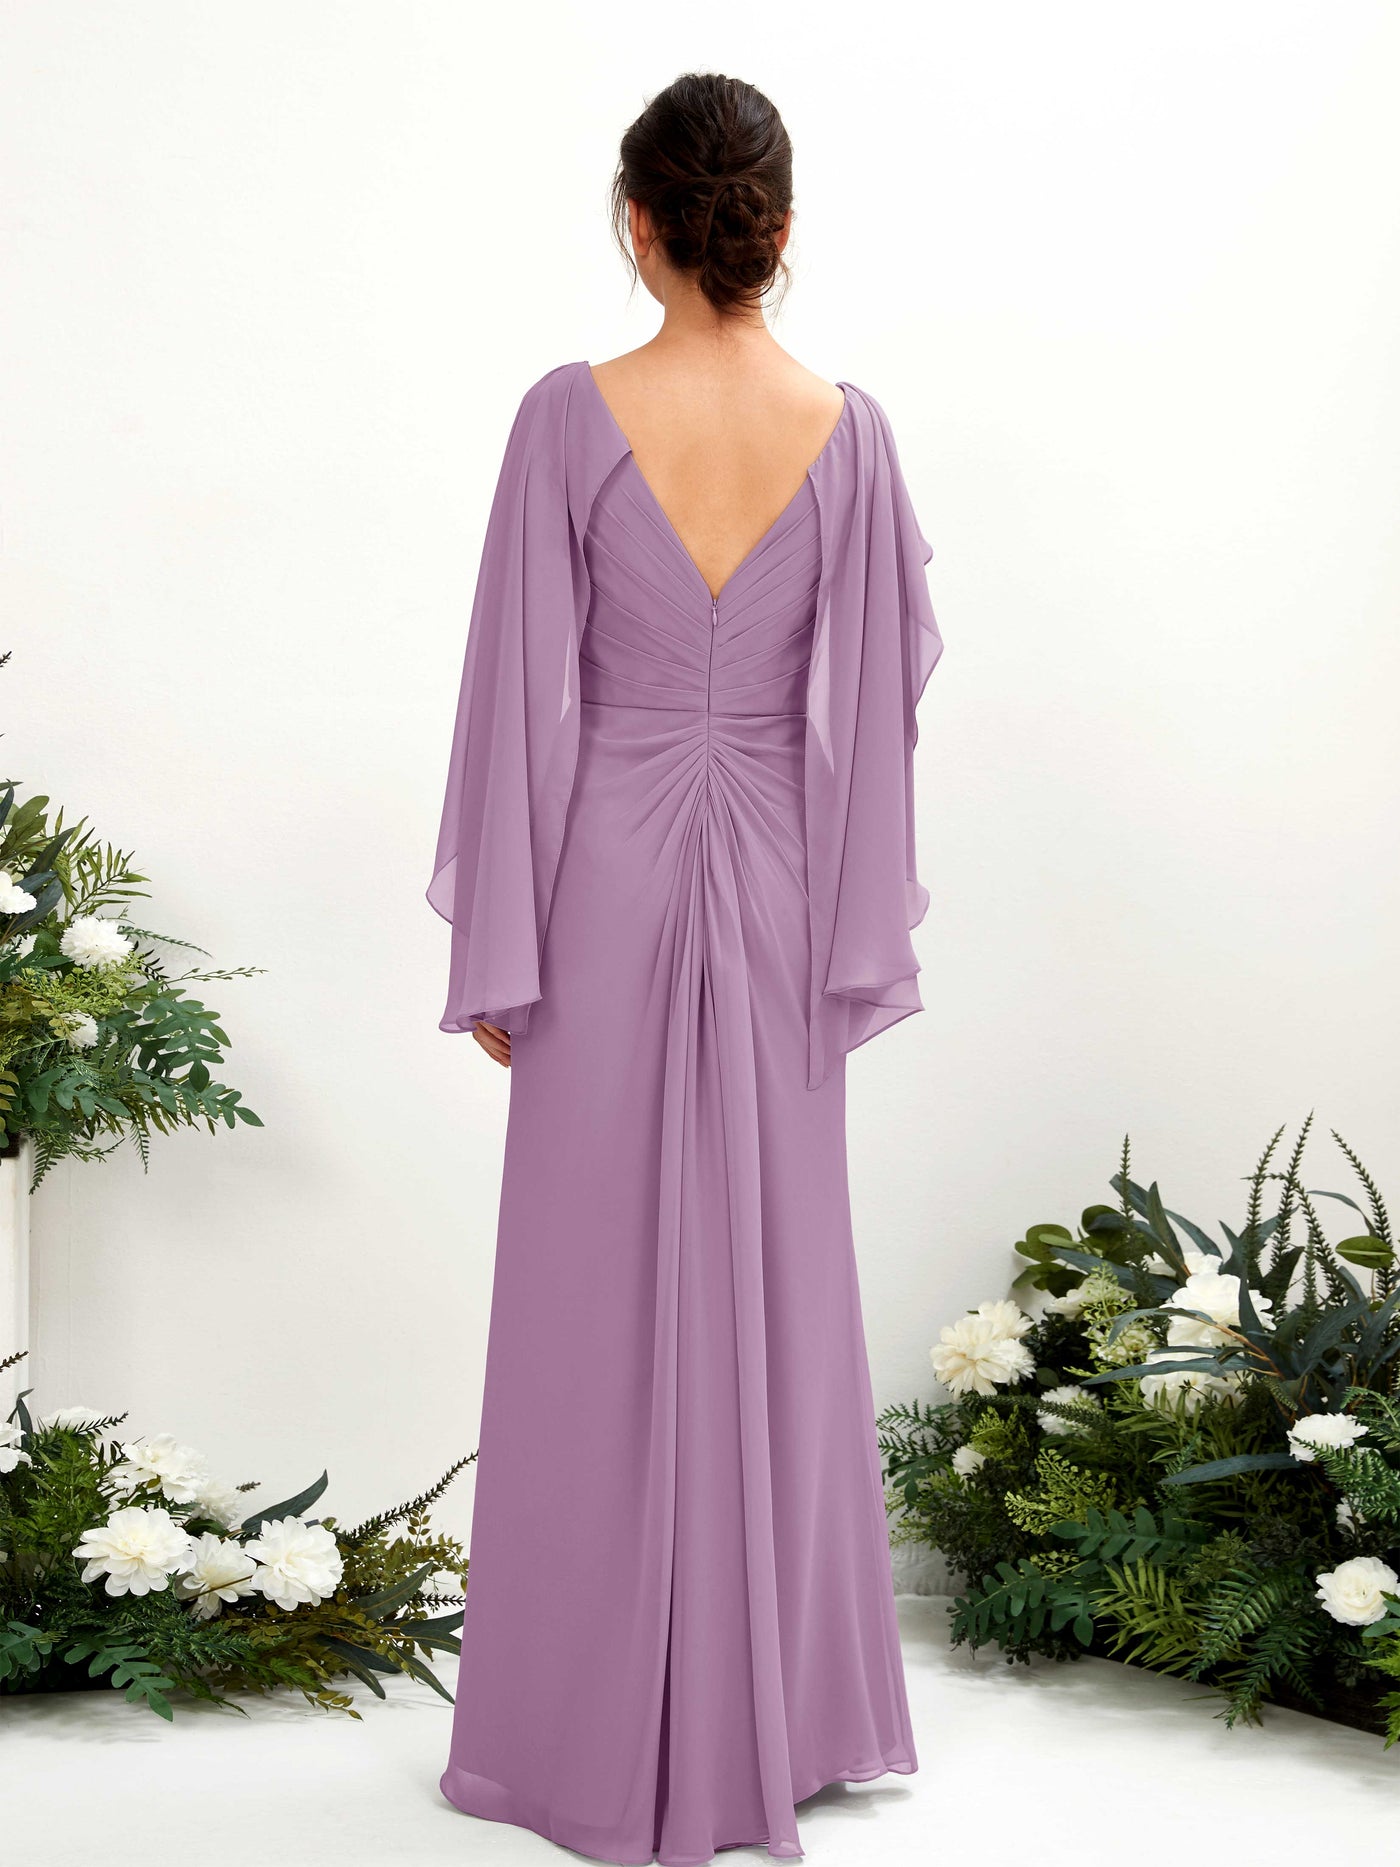 Orchid Mist Bridesmaid Dresses Bridesmaid Dress A-line Chiffon Straps Full Length Long Sleeves Wedding Party Dress (80220121)#color_orchid-mist